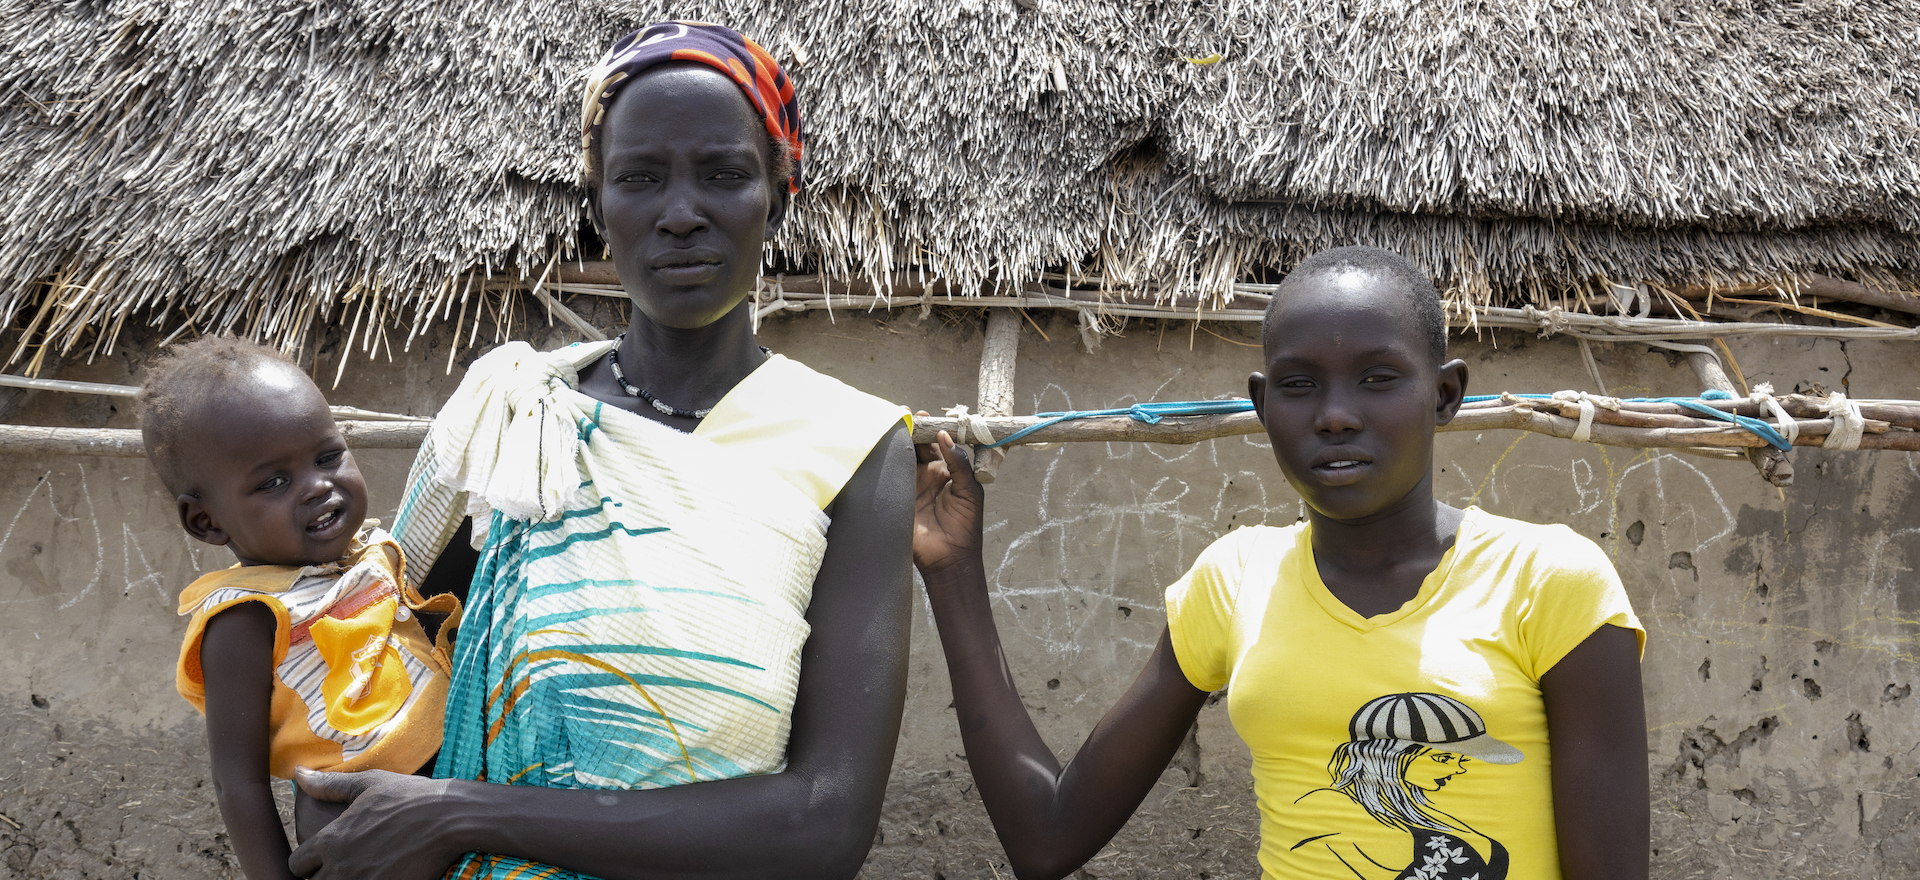 A woman holds a baby in front of a hut in New Fangak, South Sudan